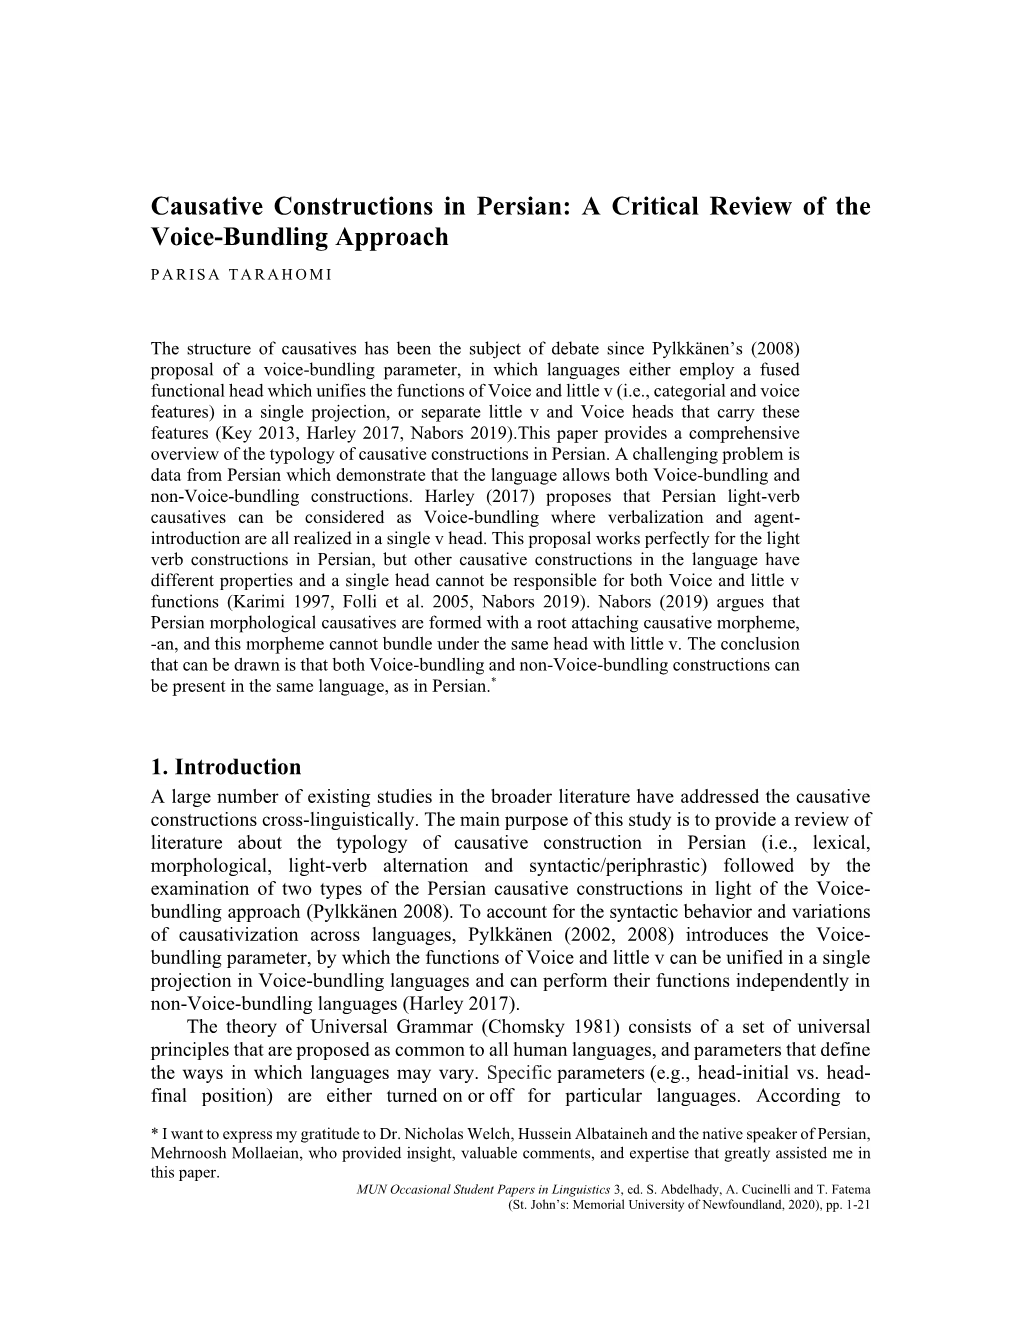 Causative Constructions in Persian: a Critical Review of the Voice-Bundling Approach PARISA TARAHOMI